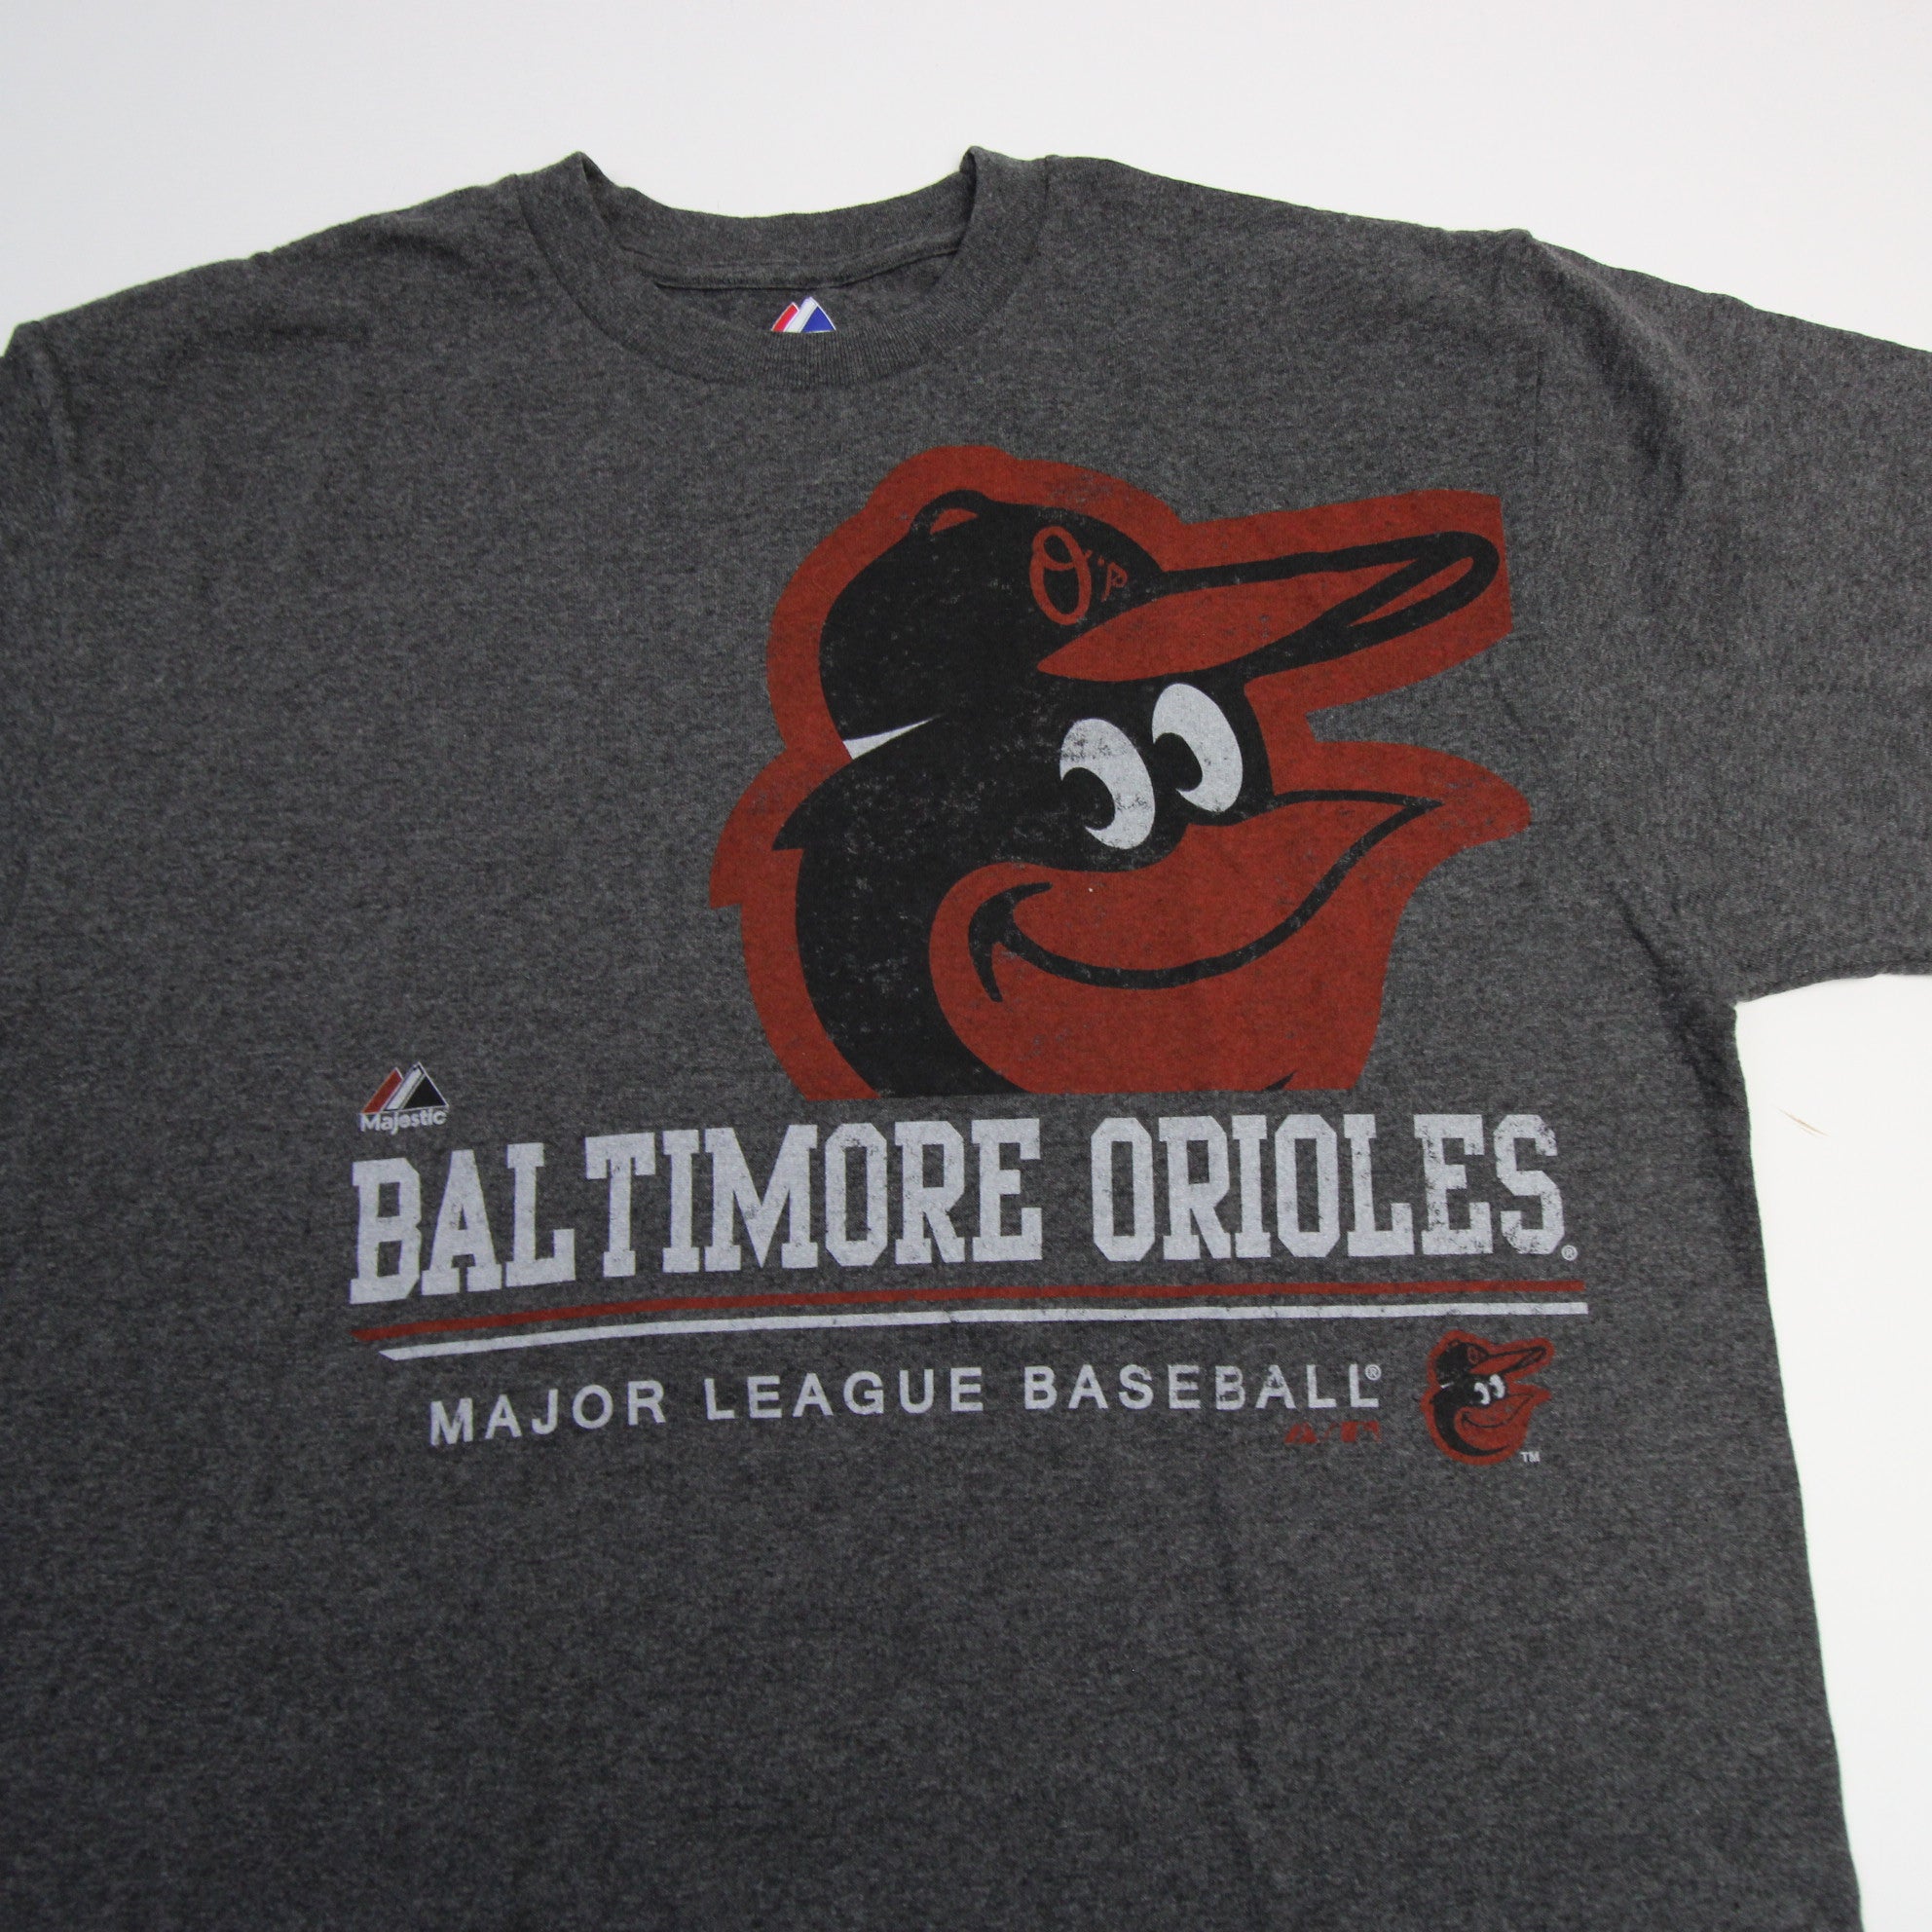 Official baltimore Orioles Majestic American League T-Shirts